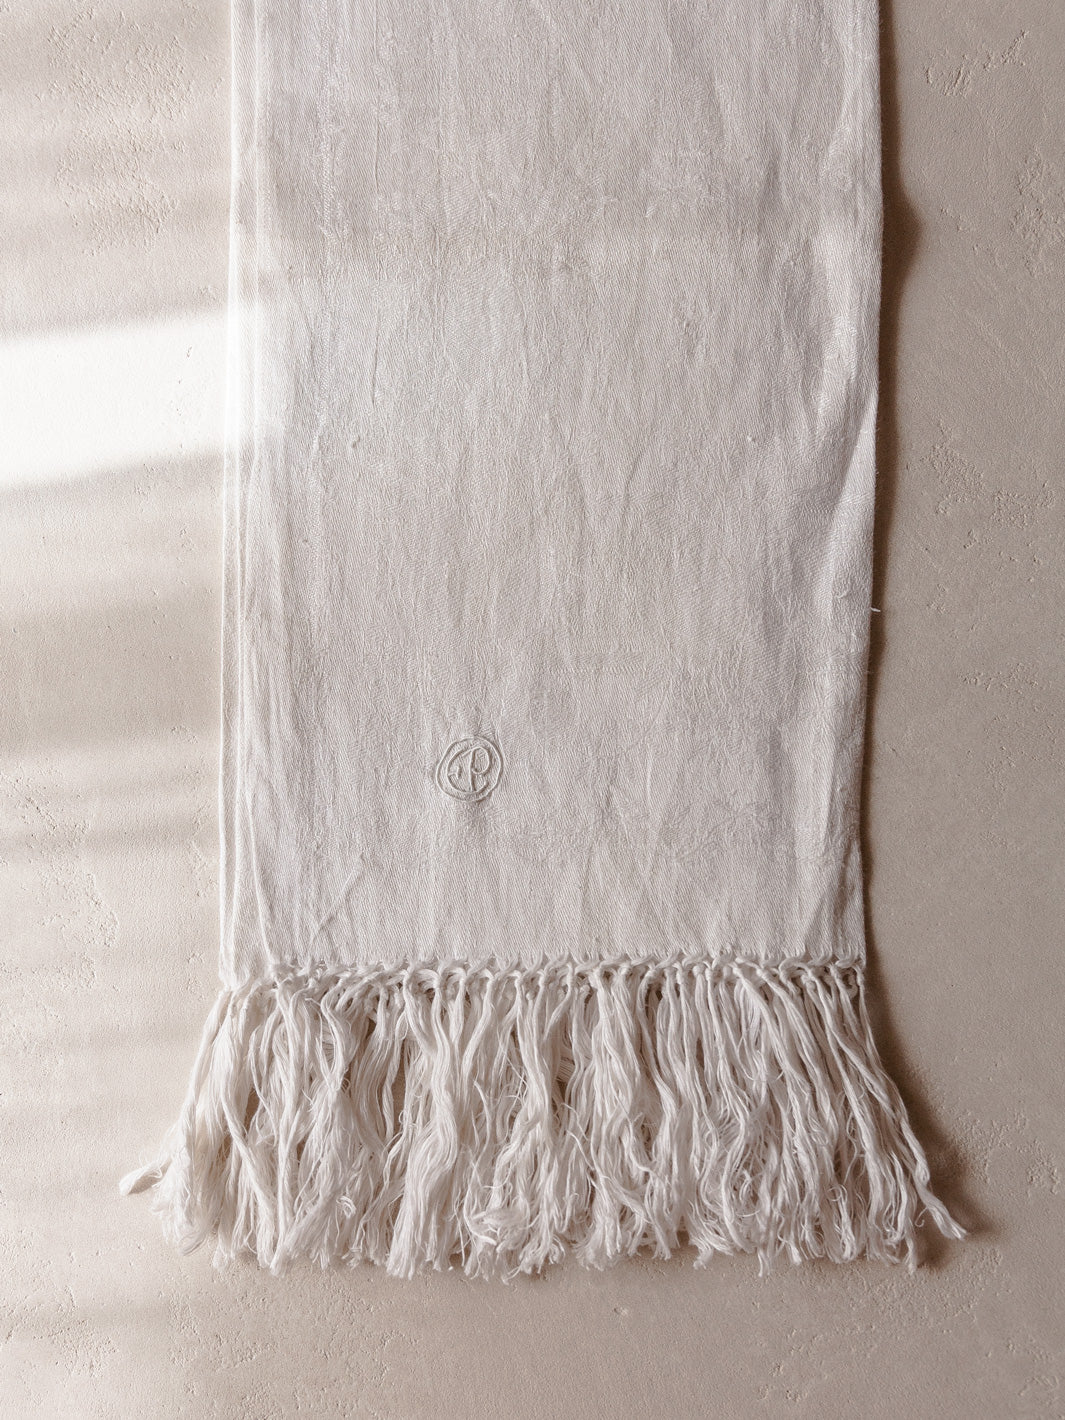 Italian cotton towel from the 40s with EB embroidery